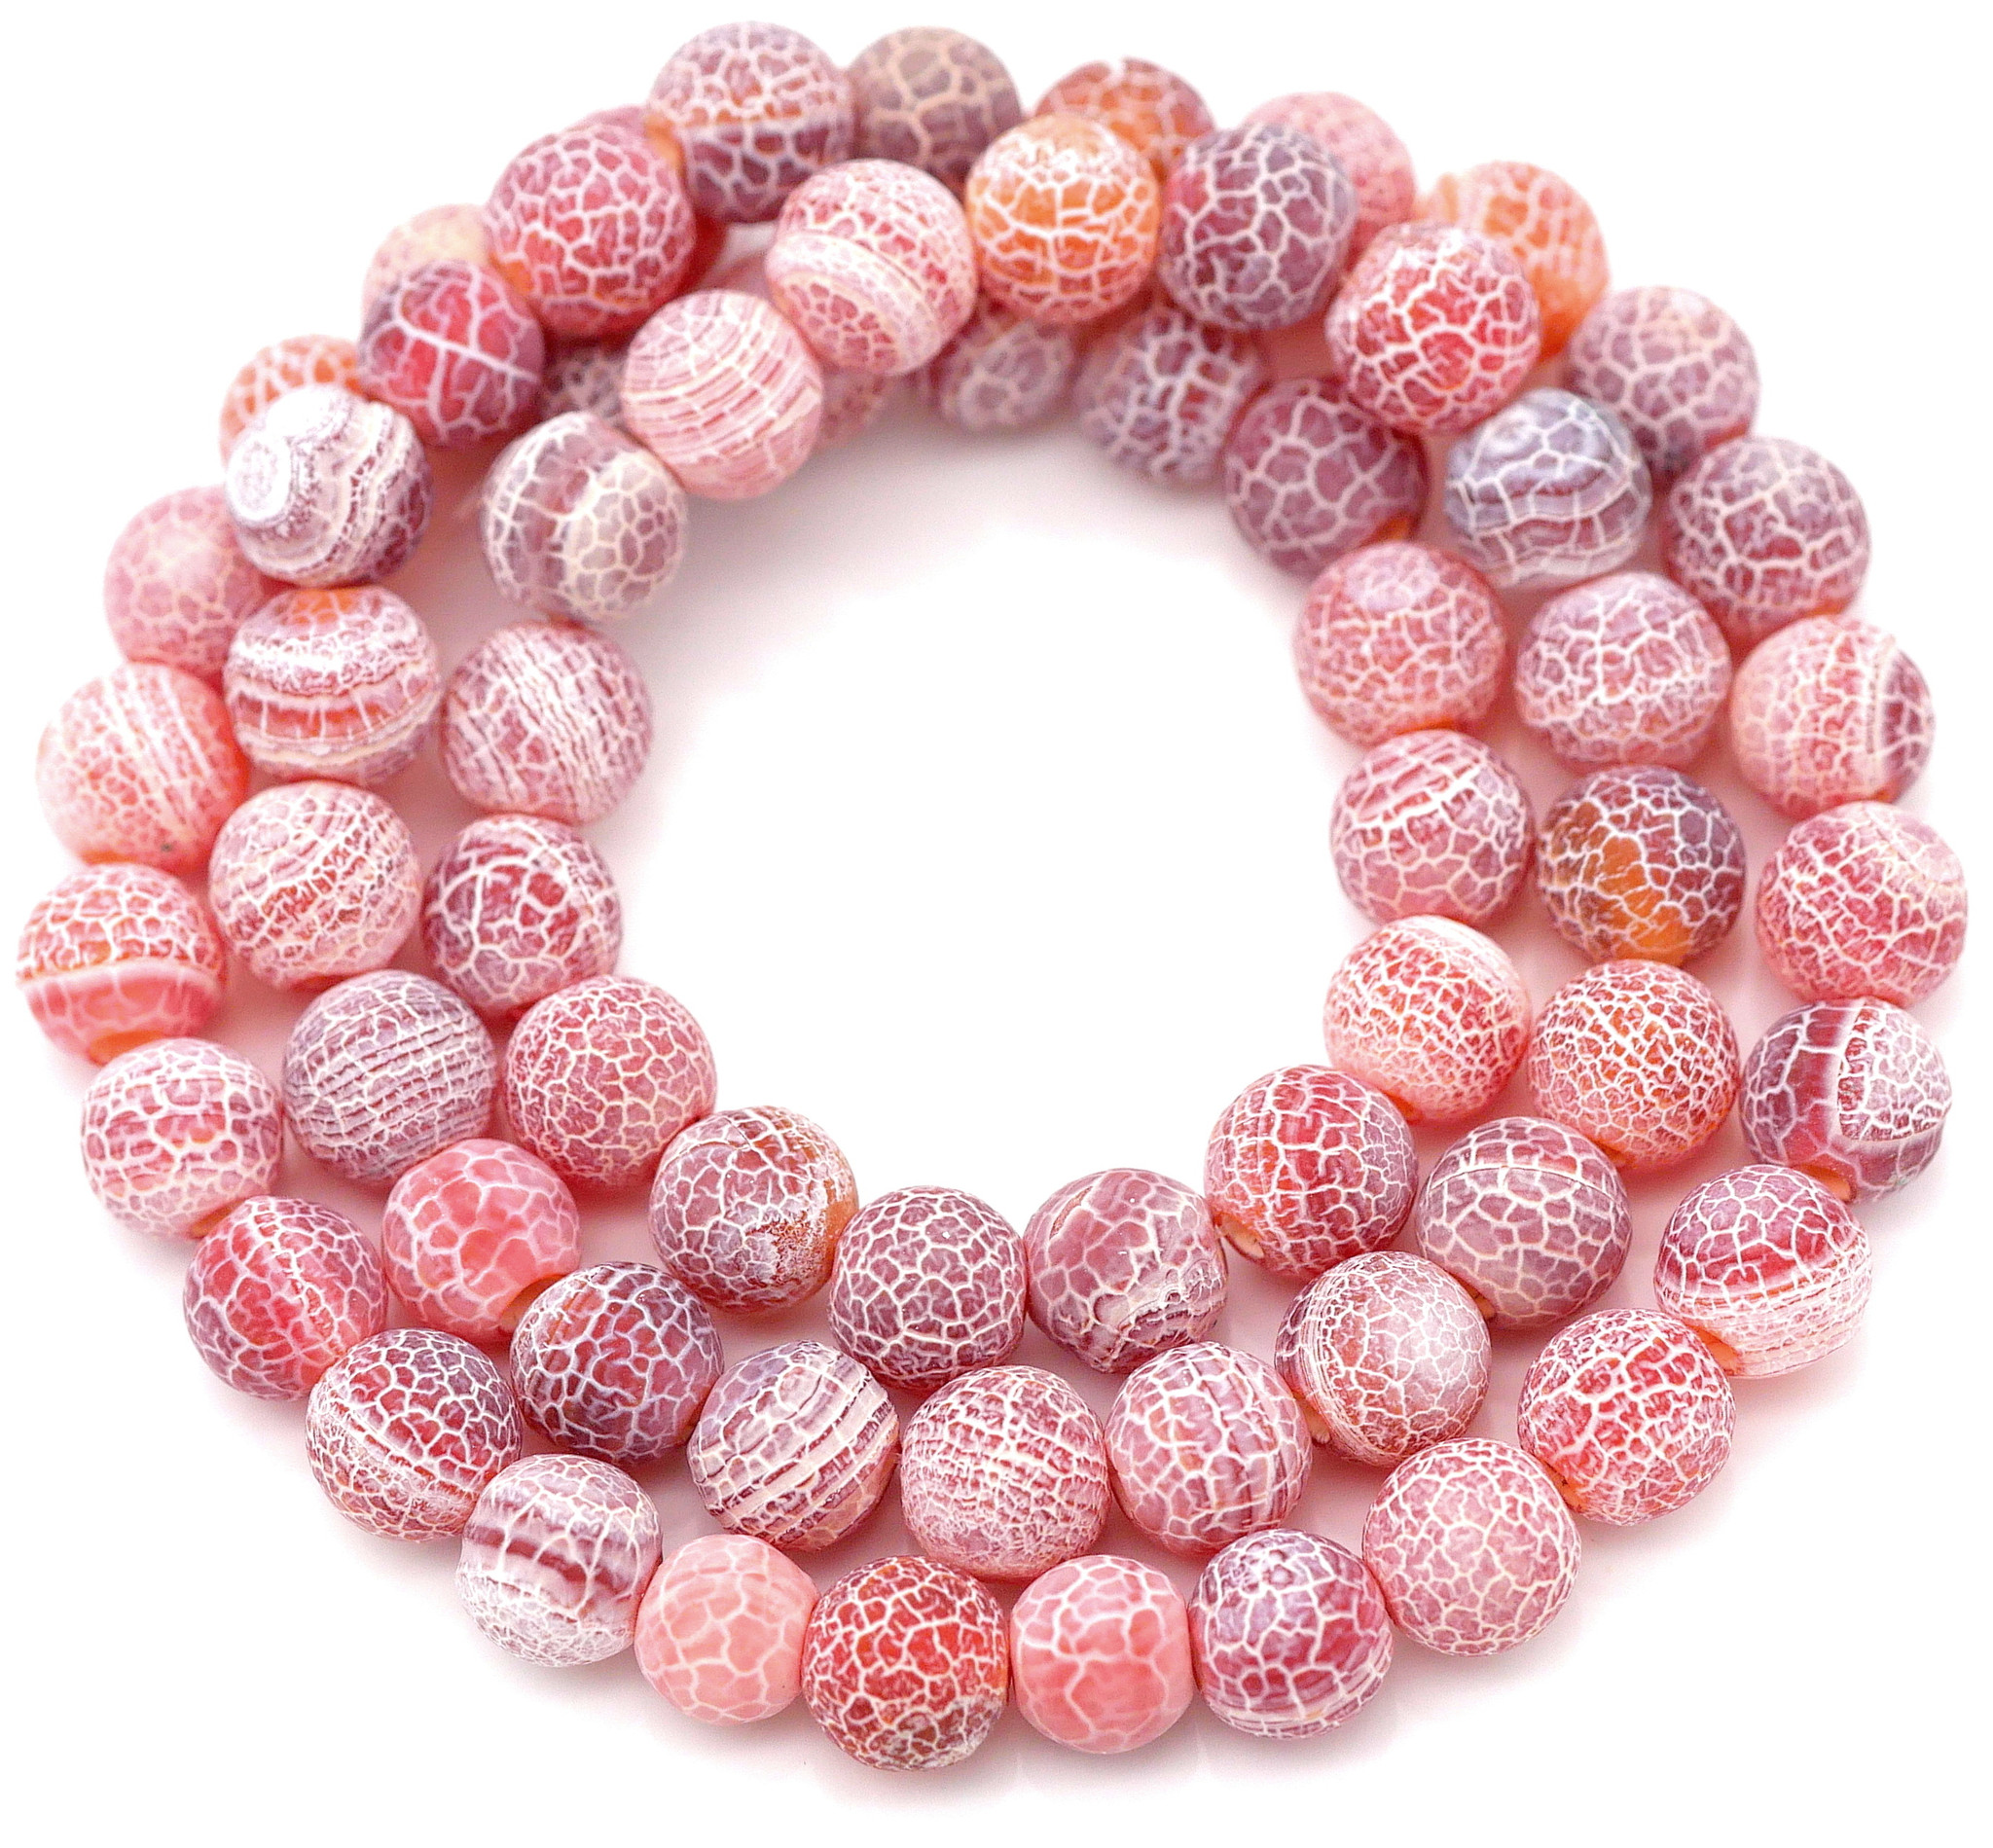 Approx. 13 Strand 6mm Matte Crackle Agate Beads (Dyed/Heated), Frosty Cyan